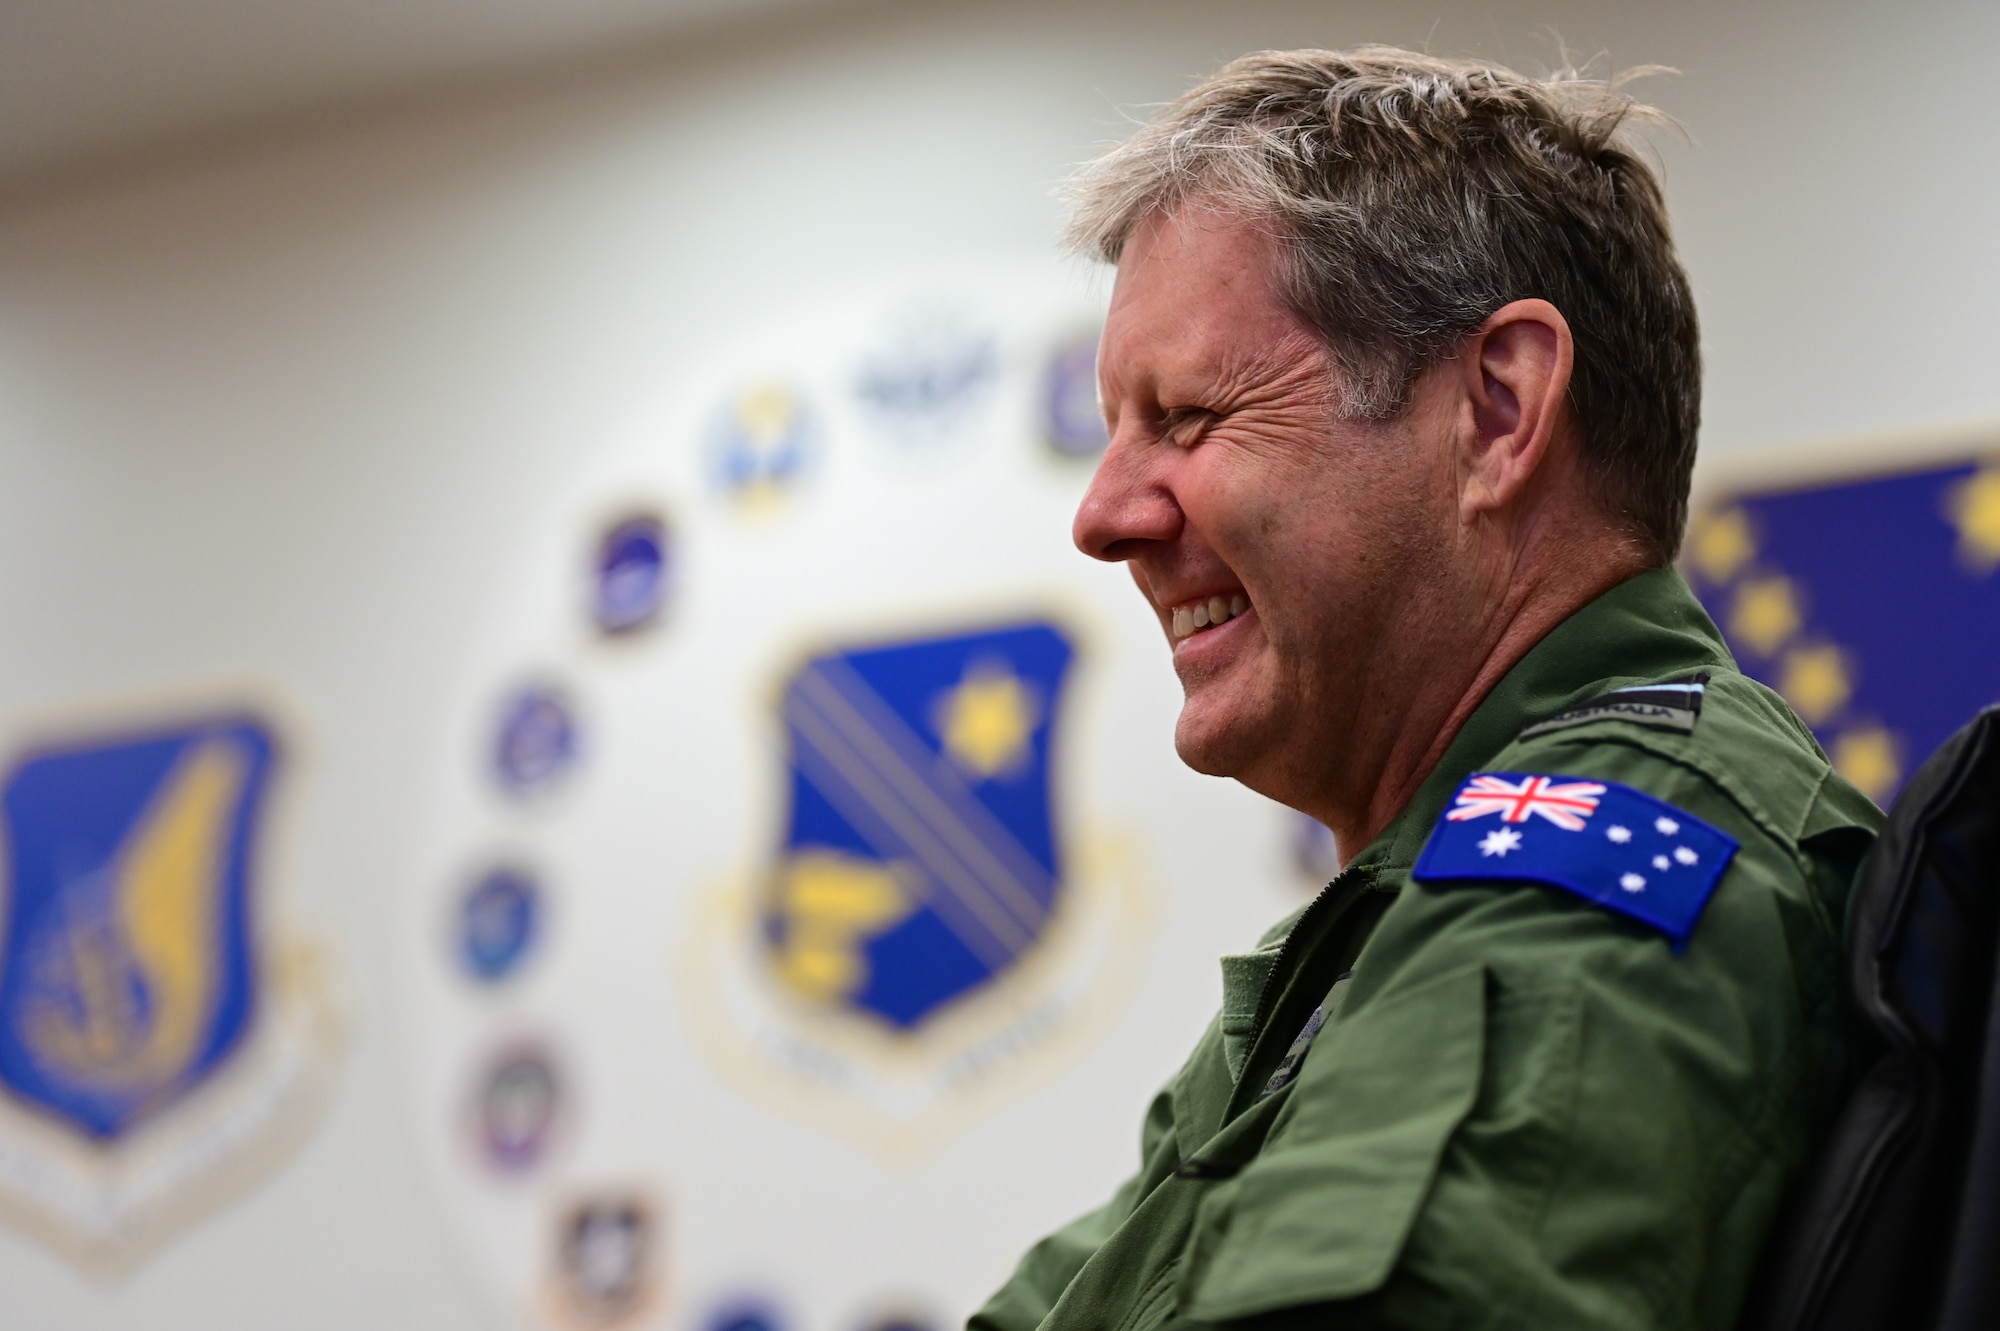 Royal Australian Air Force Air Vice-Marshal Carl Newman, Pacific Air Forces deputy commander, meets with 212th Rescue Squadron command team at Joint Base Elmendorf-Richardson, Alaska, March 28, 2023. Newman serving as the PACAF DCOM demonstrates a steadfast commitment between the U.S. and Australia. During Newman’s visit, he met with JBER commanders, chiefs, and Airmen to get a better understanding of both ongoing and upcoming Arctic operations. (U.S. Air Force photo by Airman 1st Class Quatasia Carter)